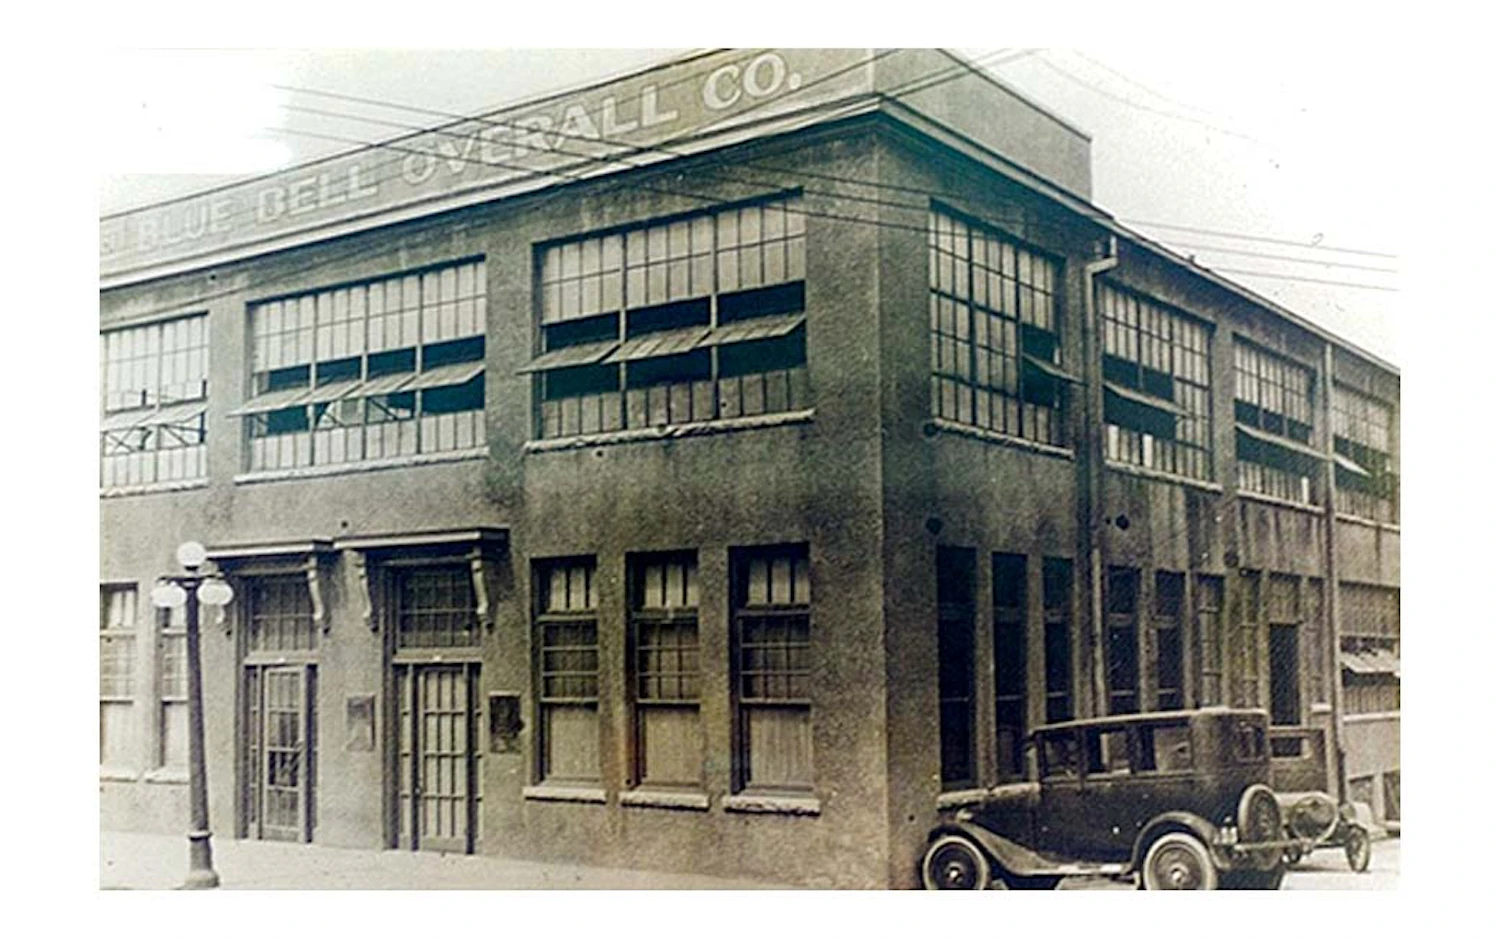 The company building during the BLUE BELL Era